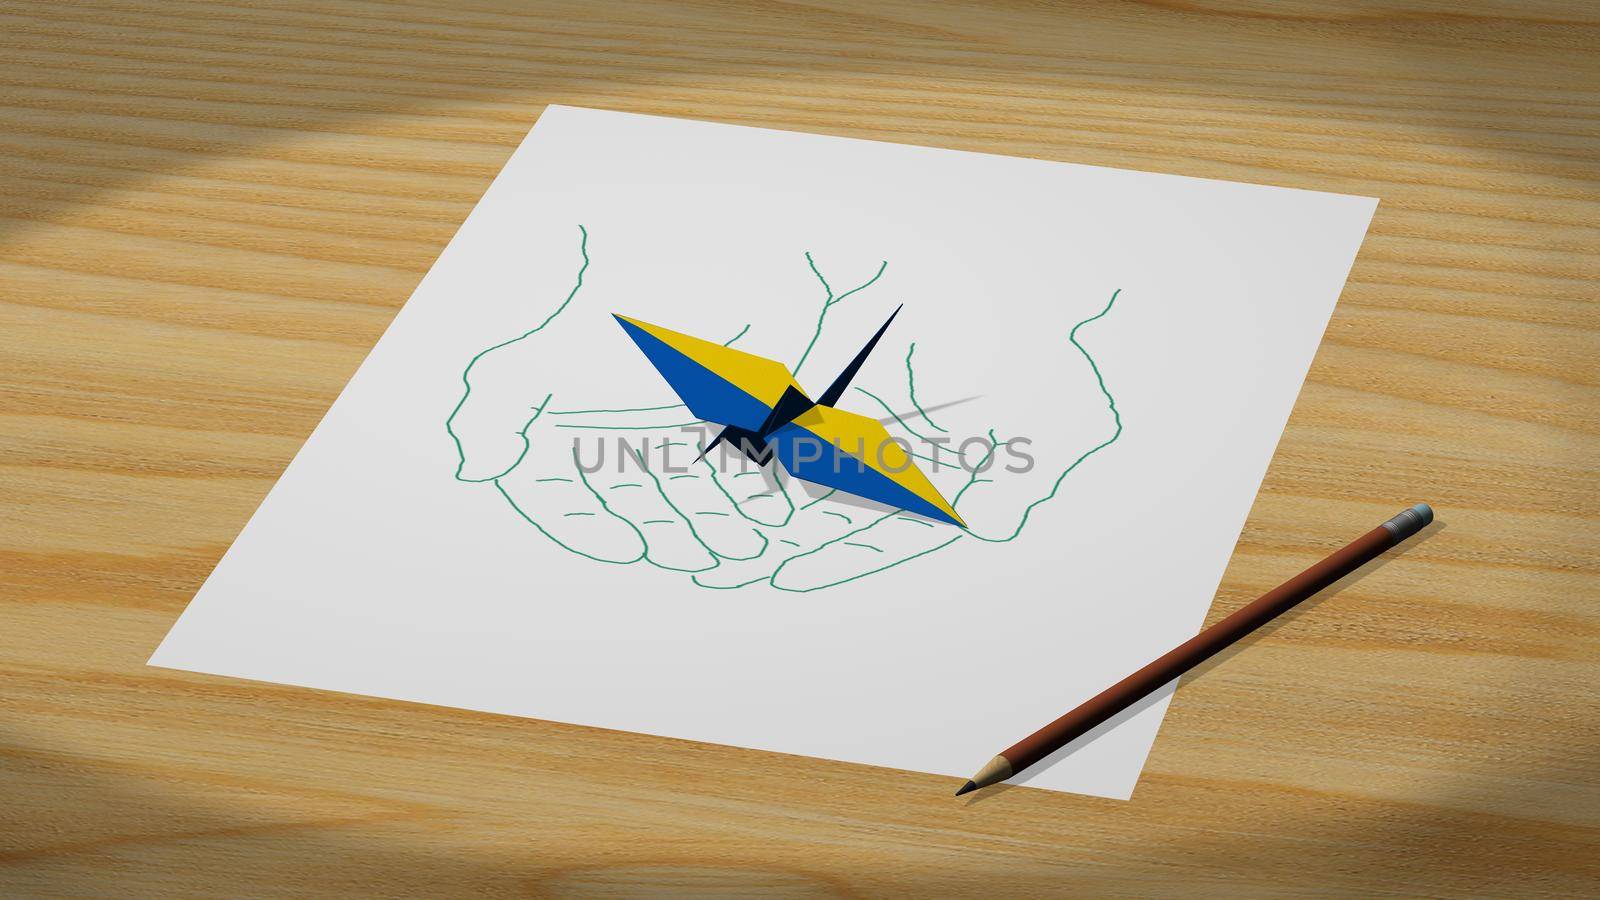 Drawn on a paper hands holding an origami crane with ukrainian flag 3d illustration render.